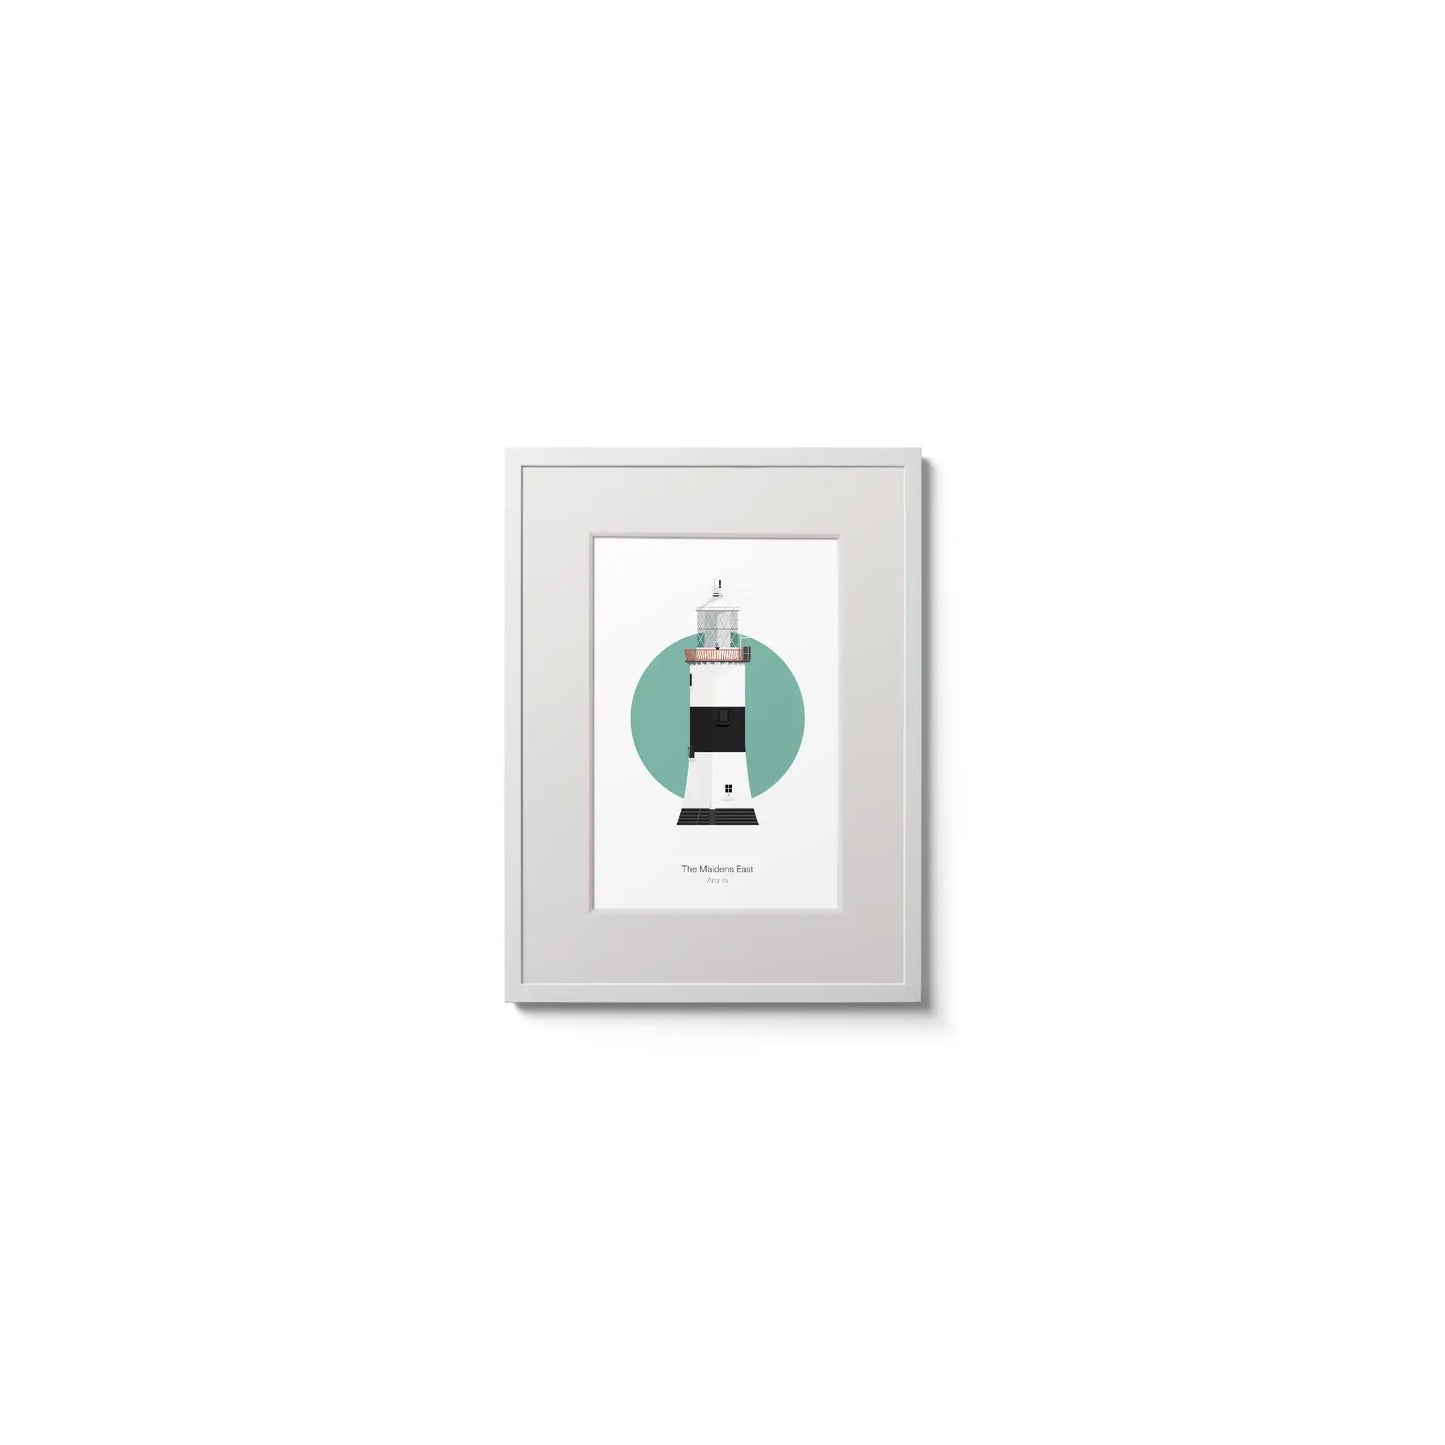 Illustration of The Maidens lighthouse on a white background inside light blue square,  in a white frame measuring 15x20cm.